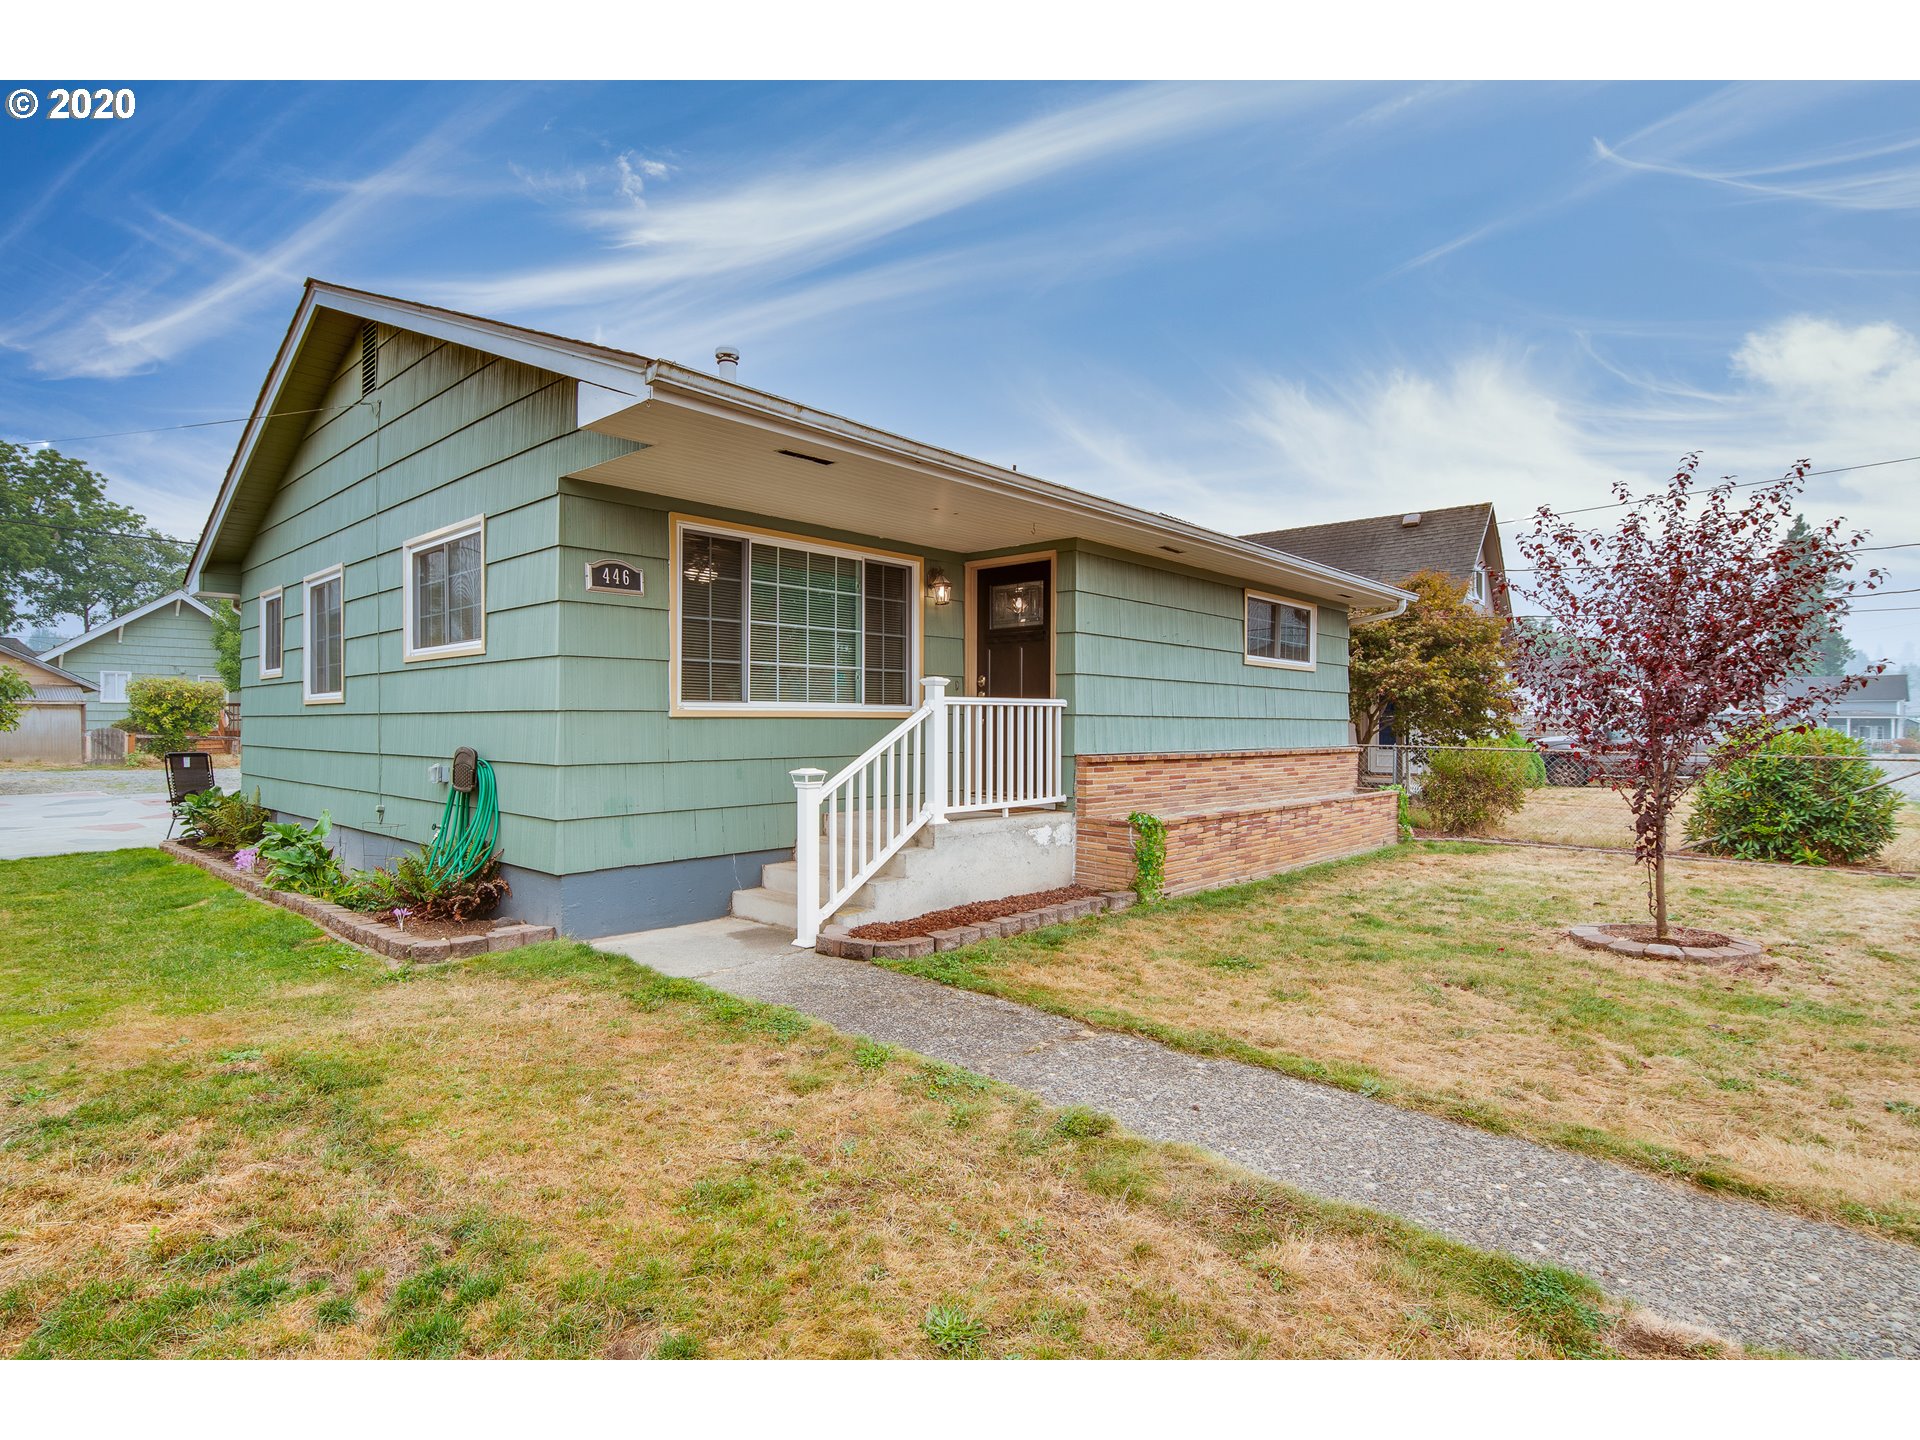 446 3RD AVE (1 of 25)